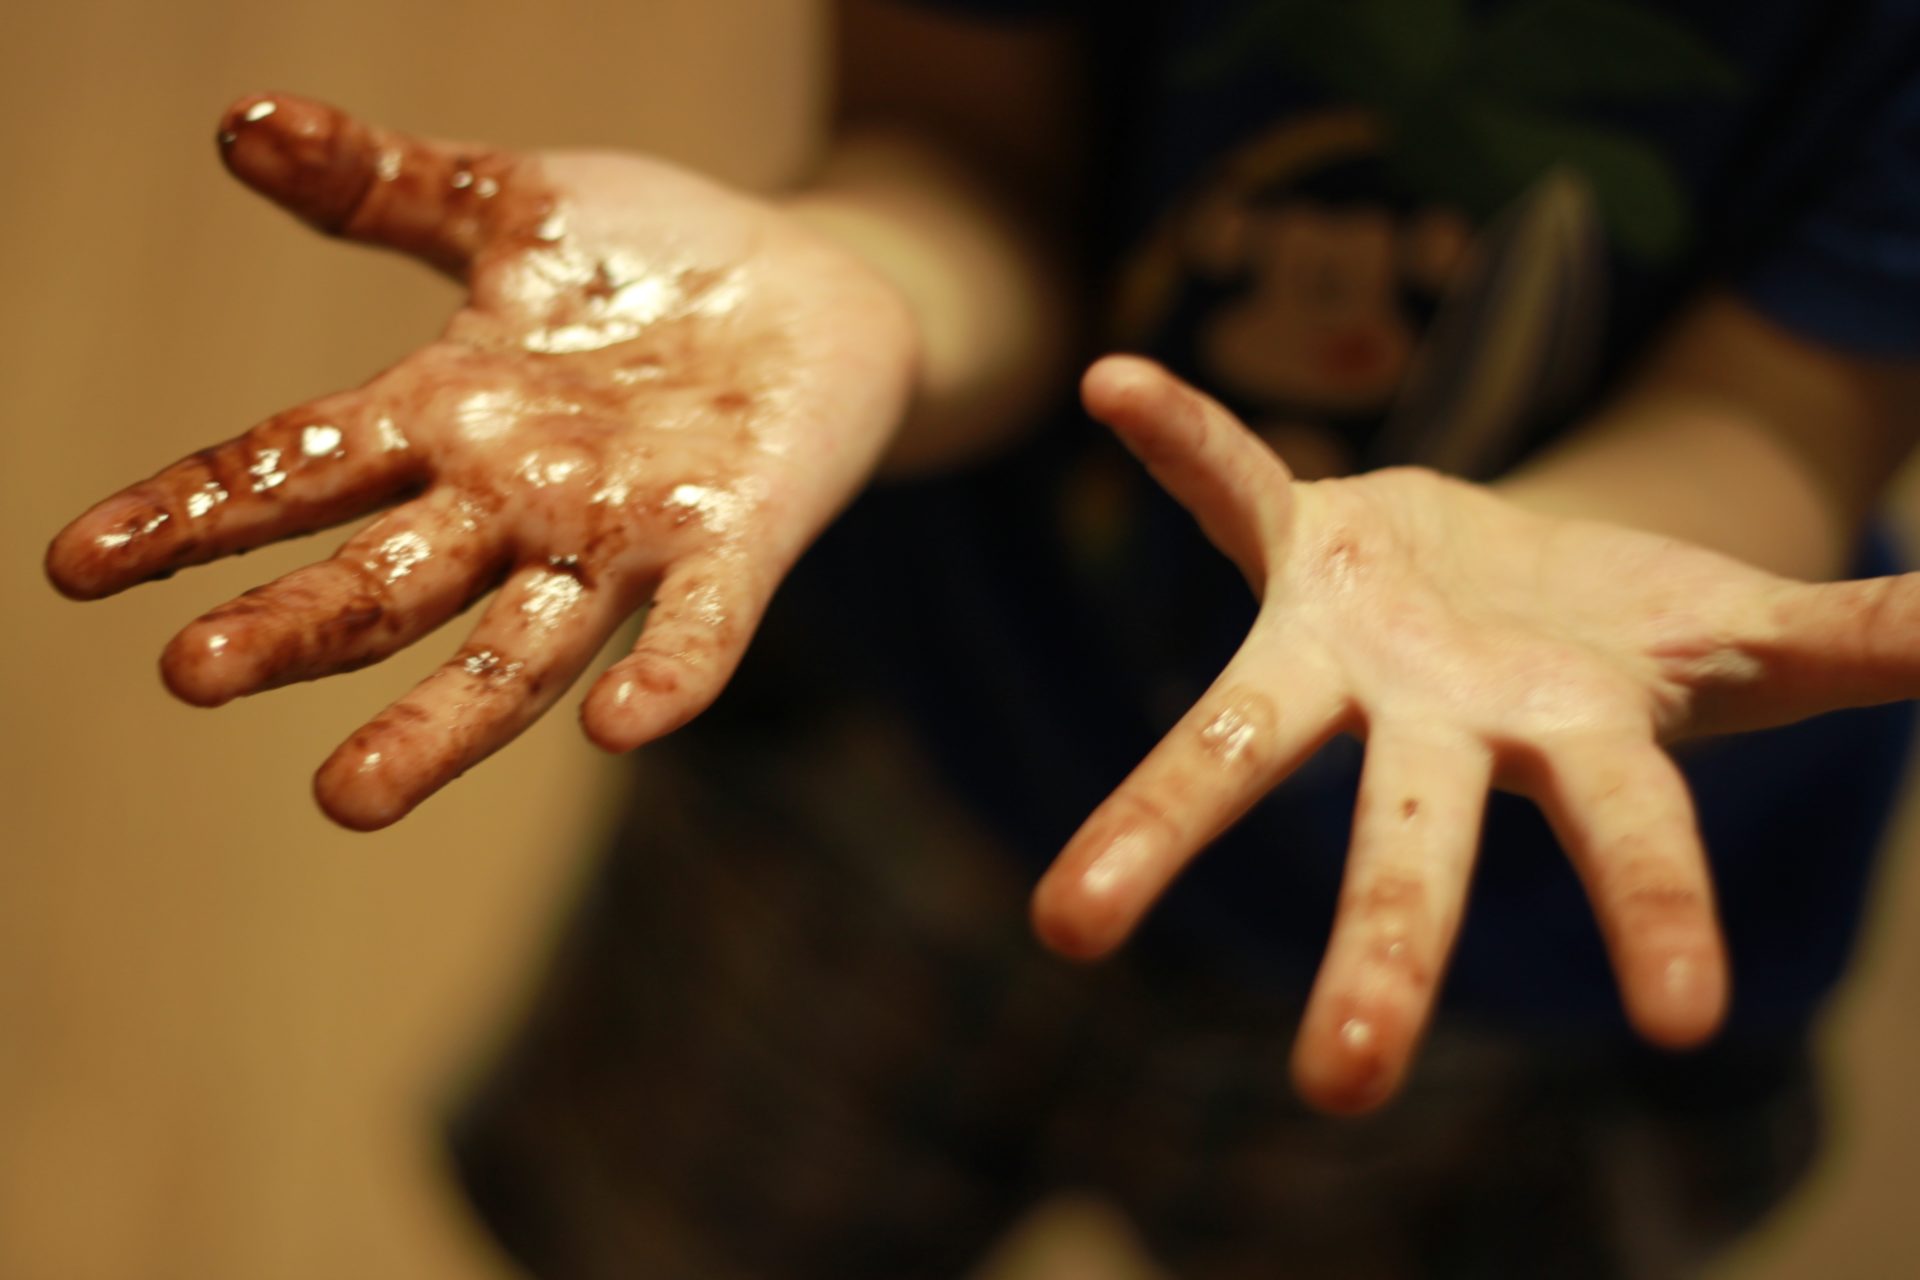 25% of Singaporean kids don’t wash their hands after using the bathroom: survey thumbnail